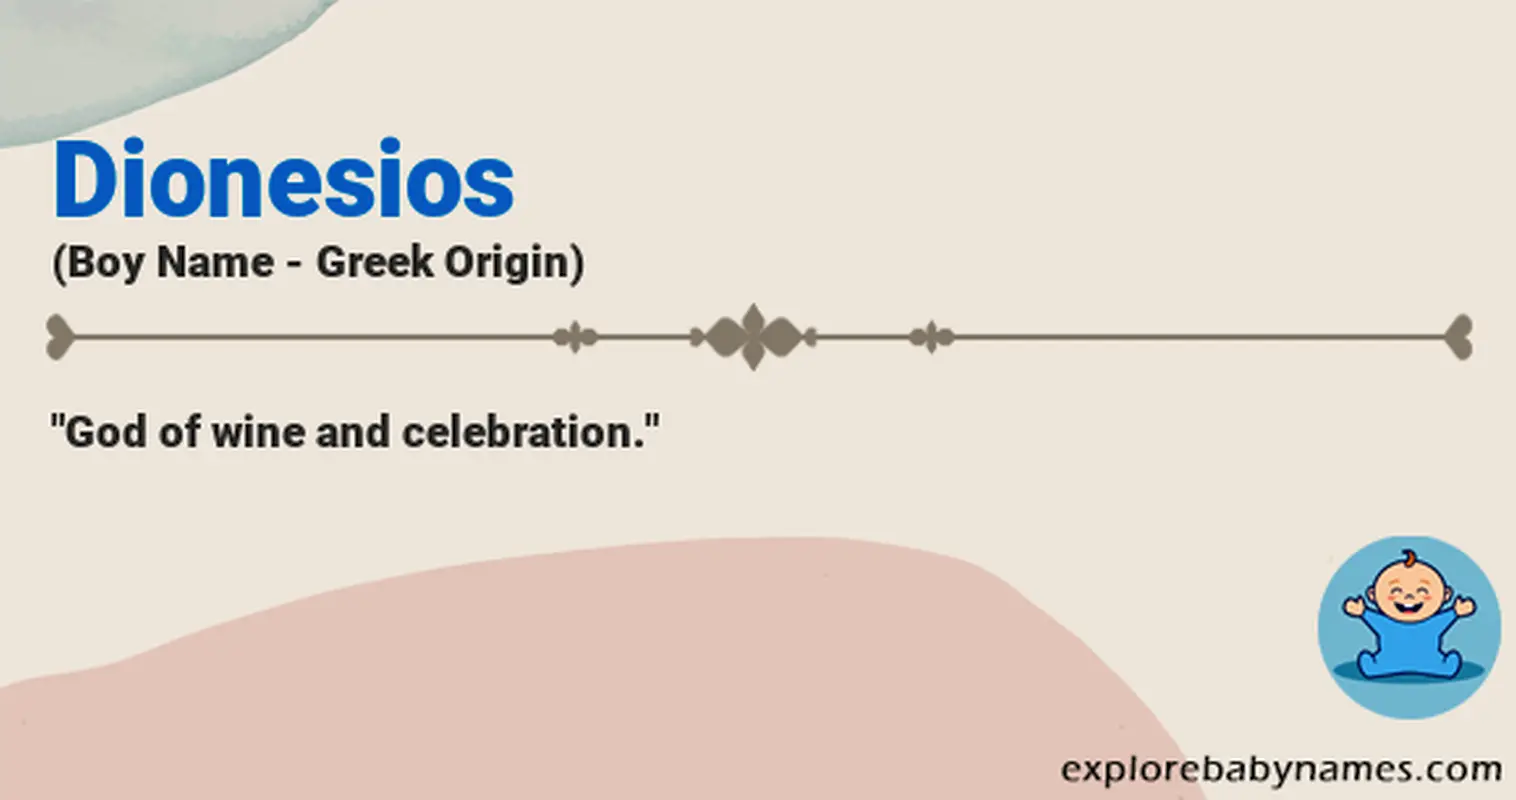 Meaning of Dionesios